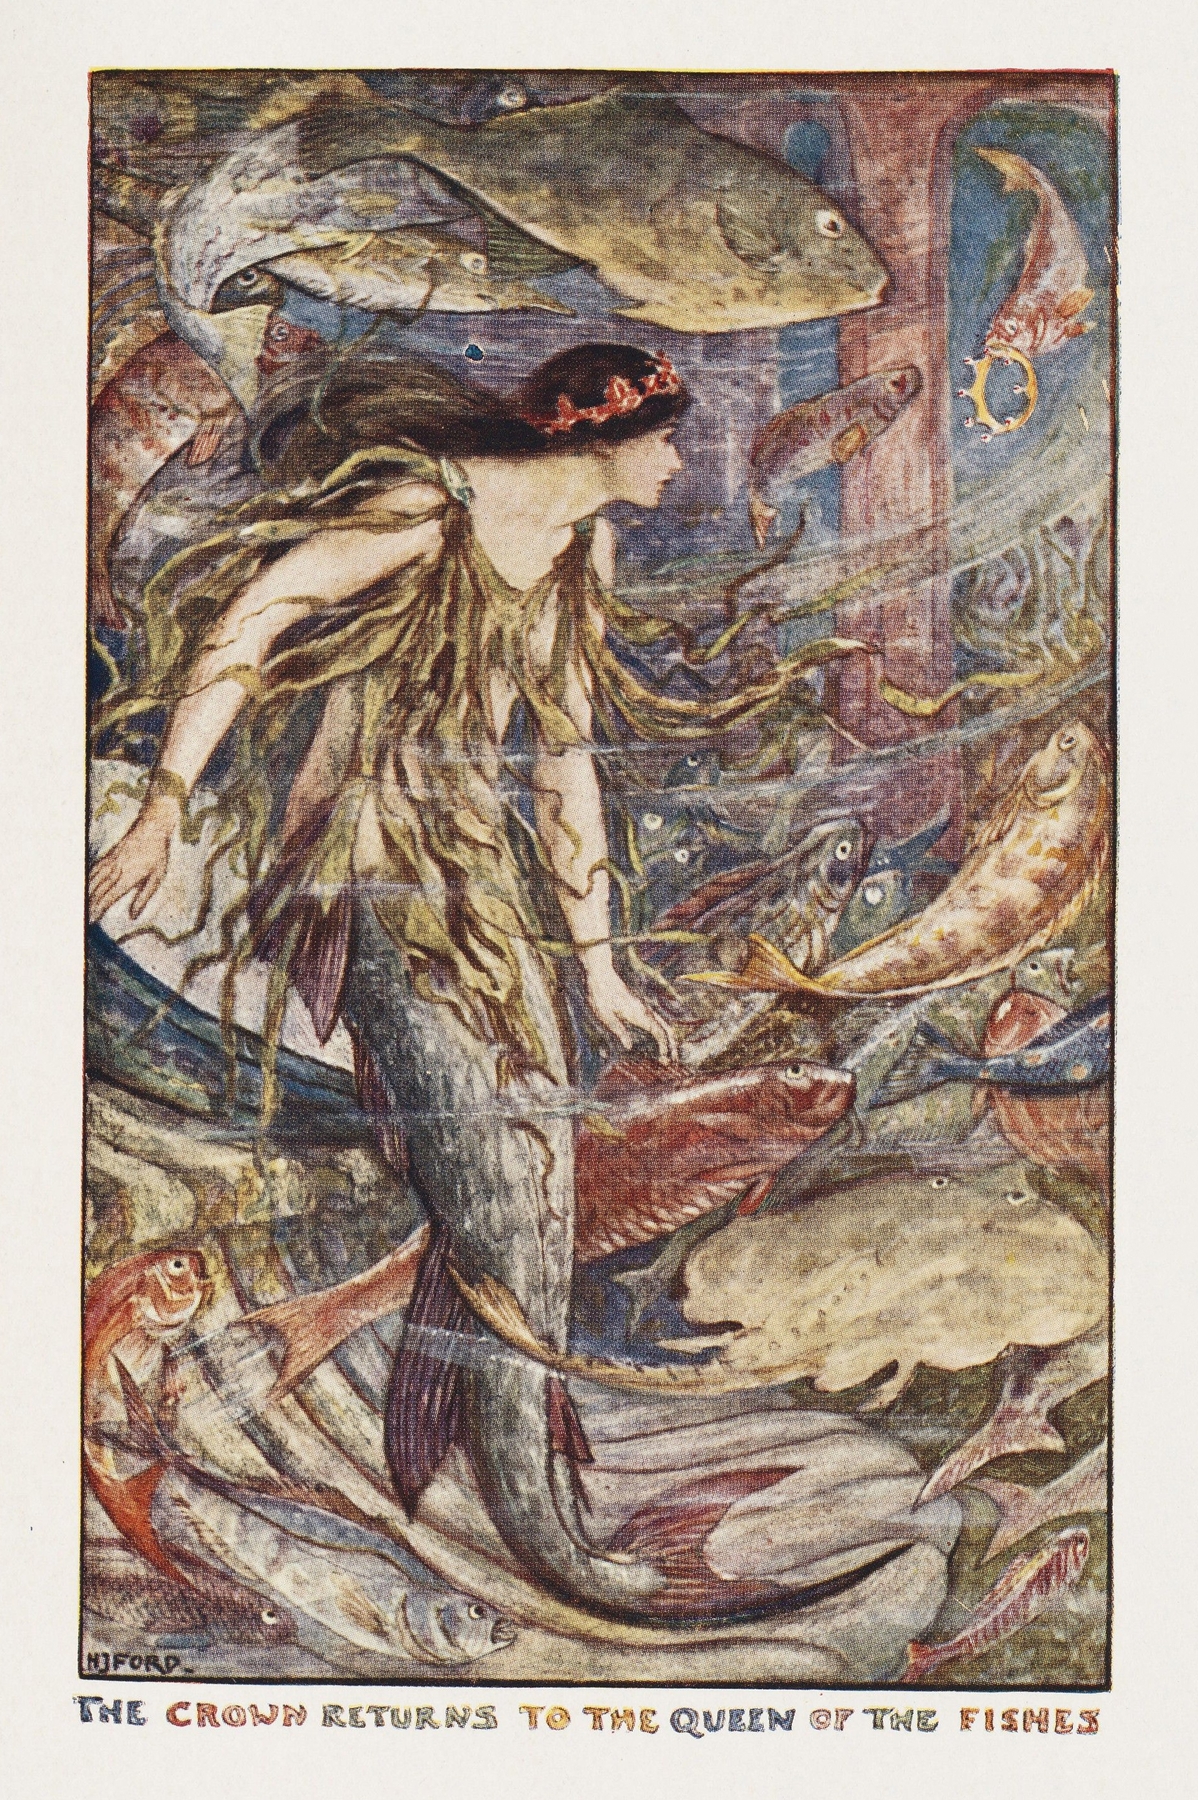 The Crown Returns to the Queen of the Fishes - Henry Justice Ford, 1906